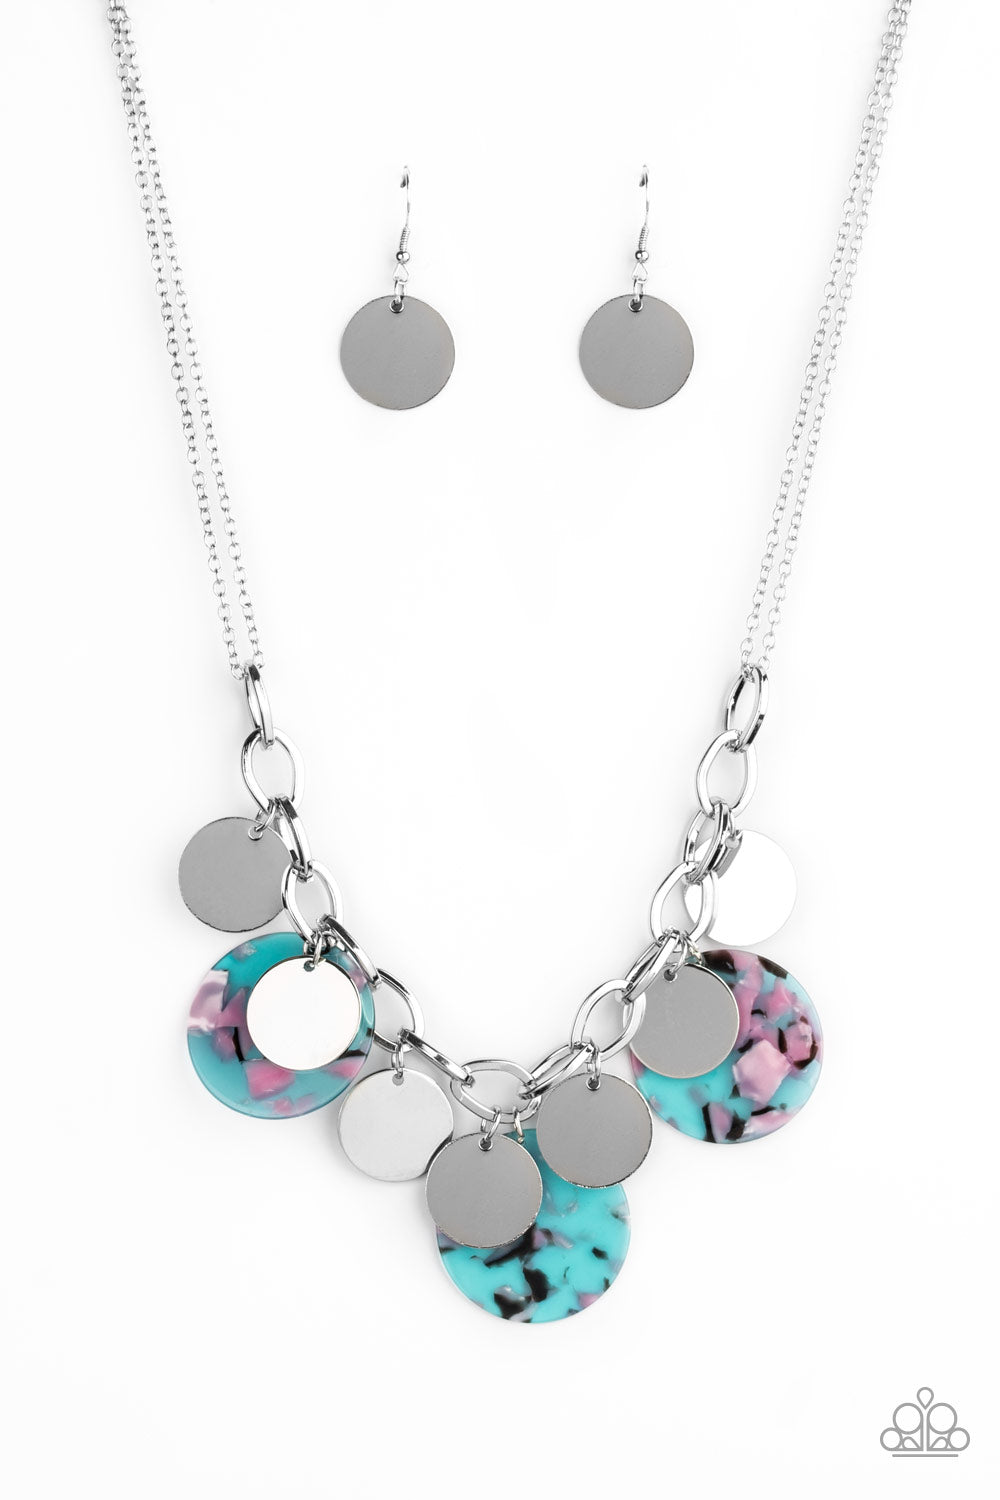 Paparazzi Confetti Confection - Blue Acrylic Necklace - A Finishing Touch 